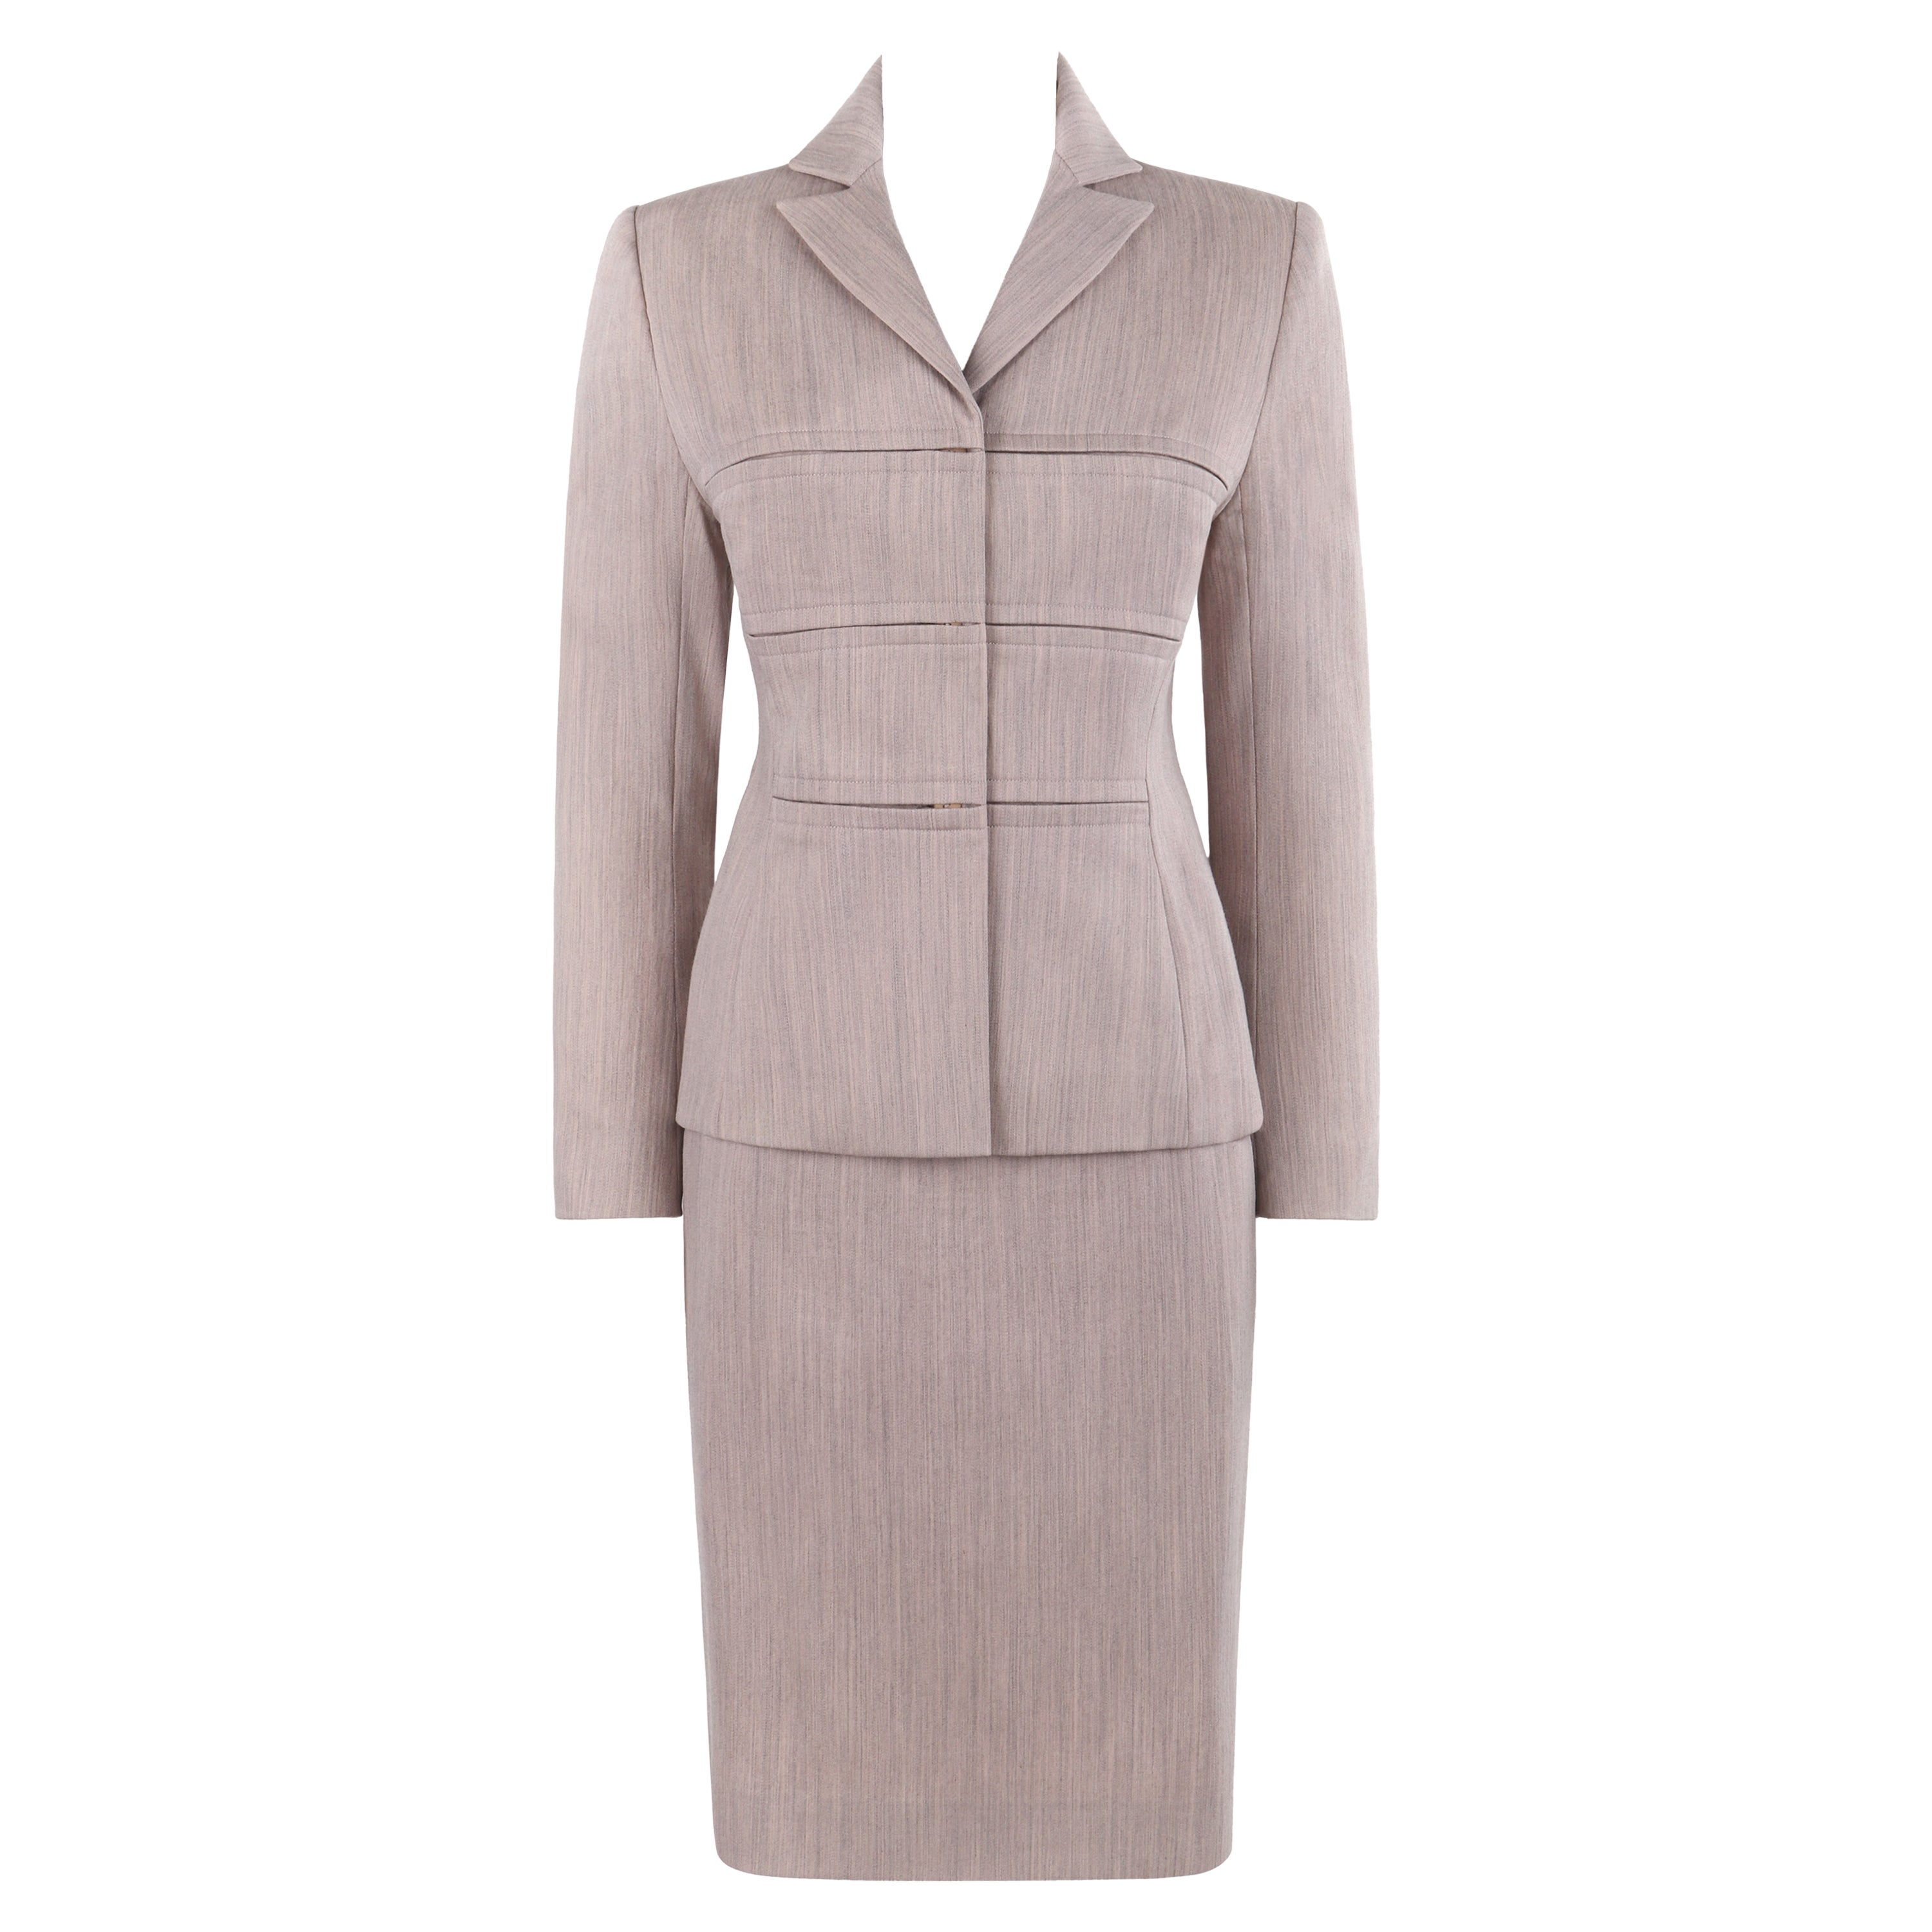 GIVENCHY Couture A/W 1998 ALEXANDER McQUEEN 2pc Tailored Blazer Skirt Suit Set For Sale